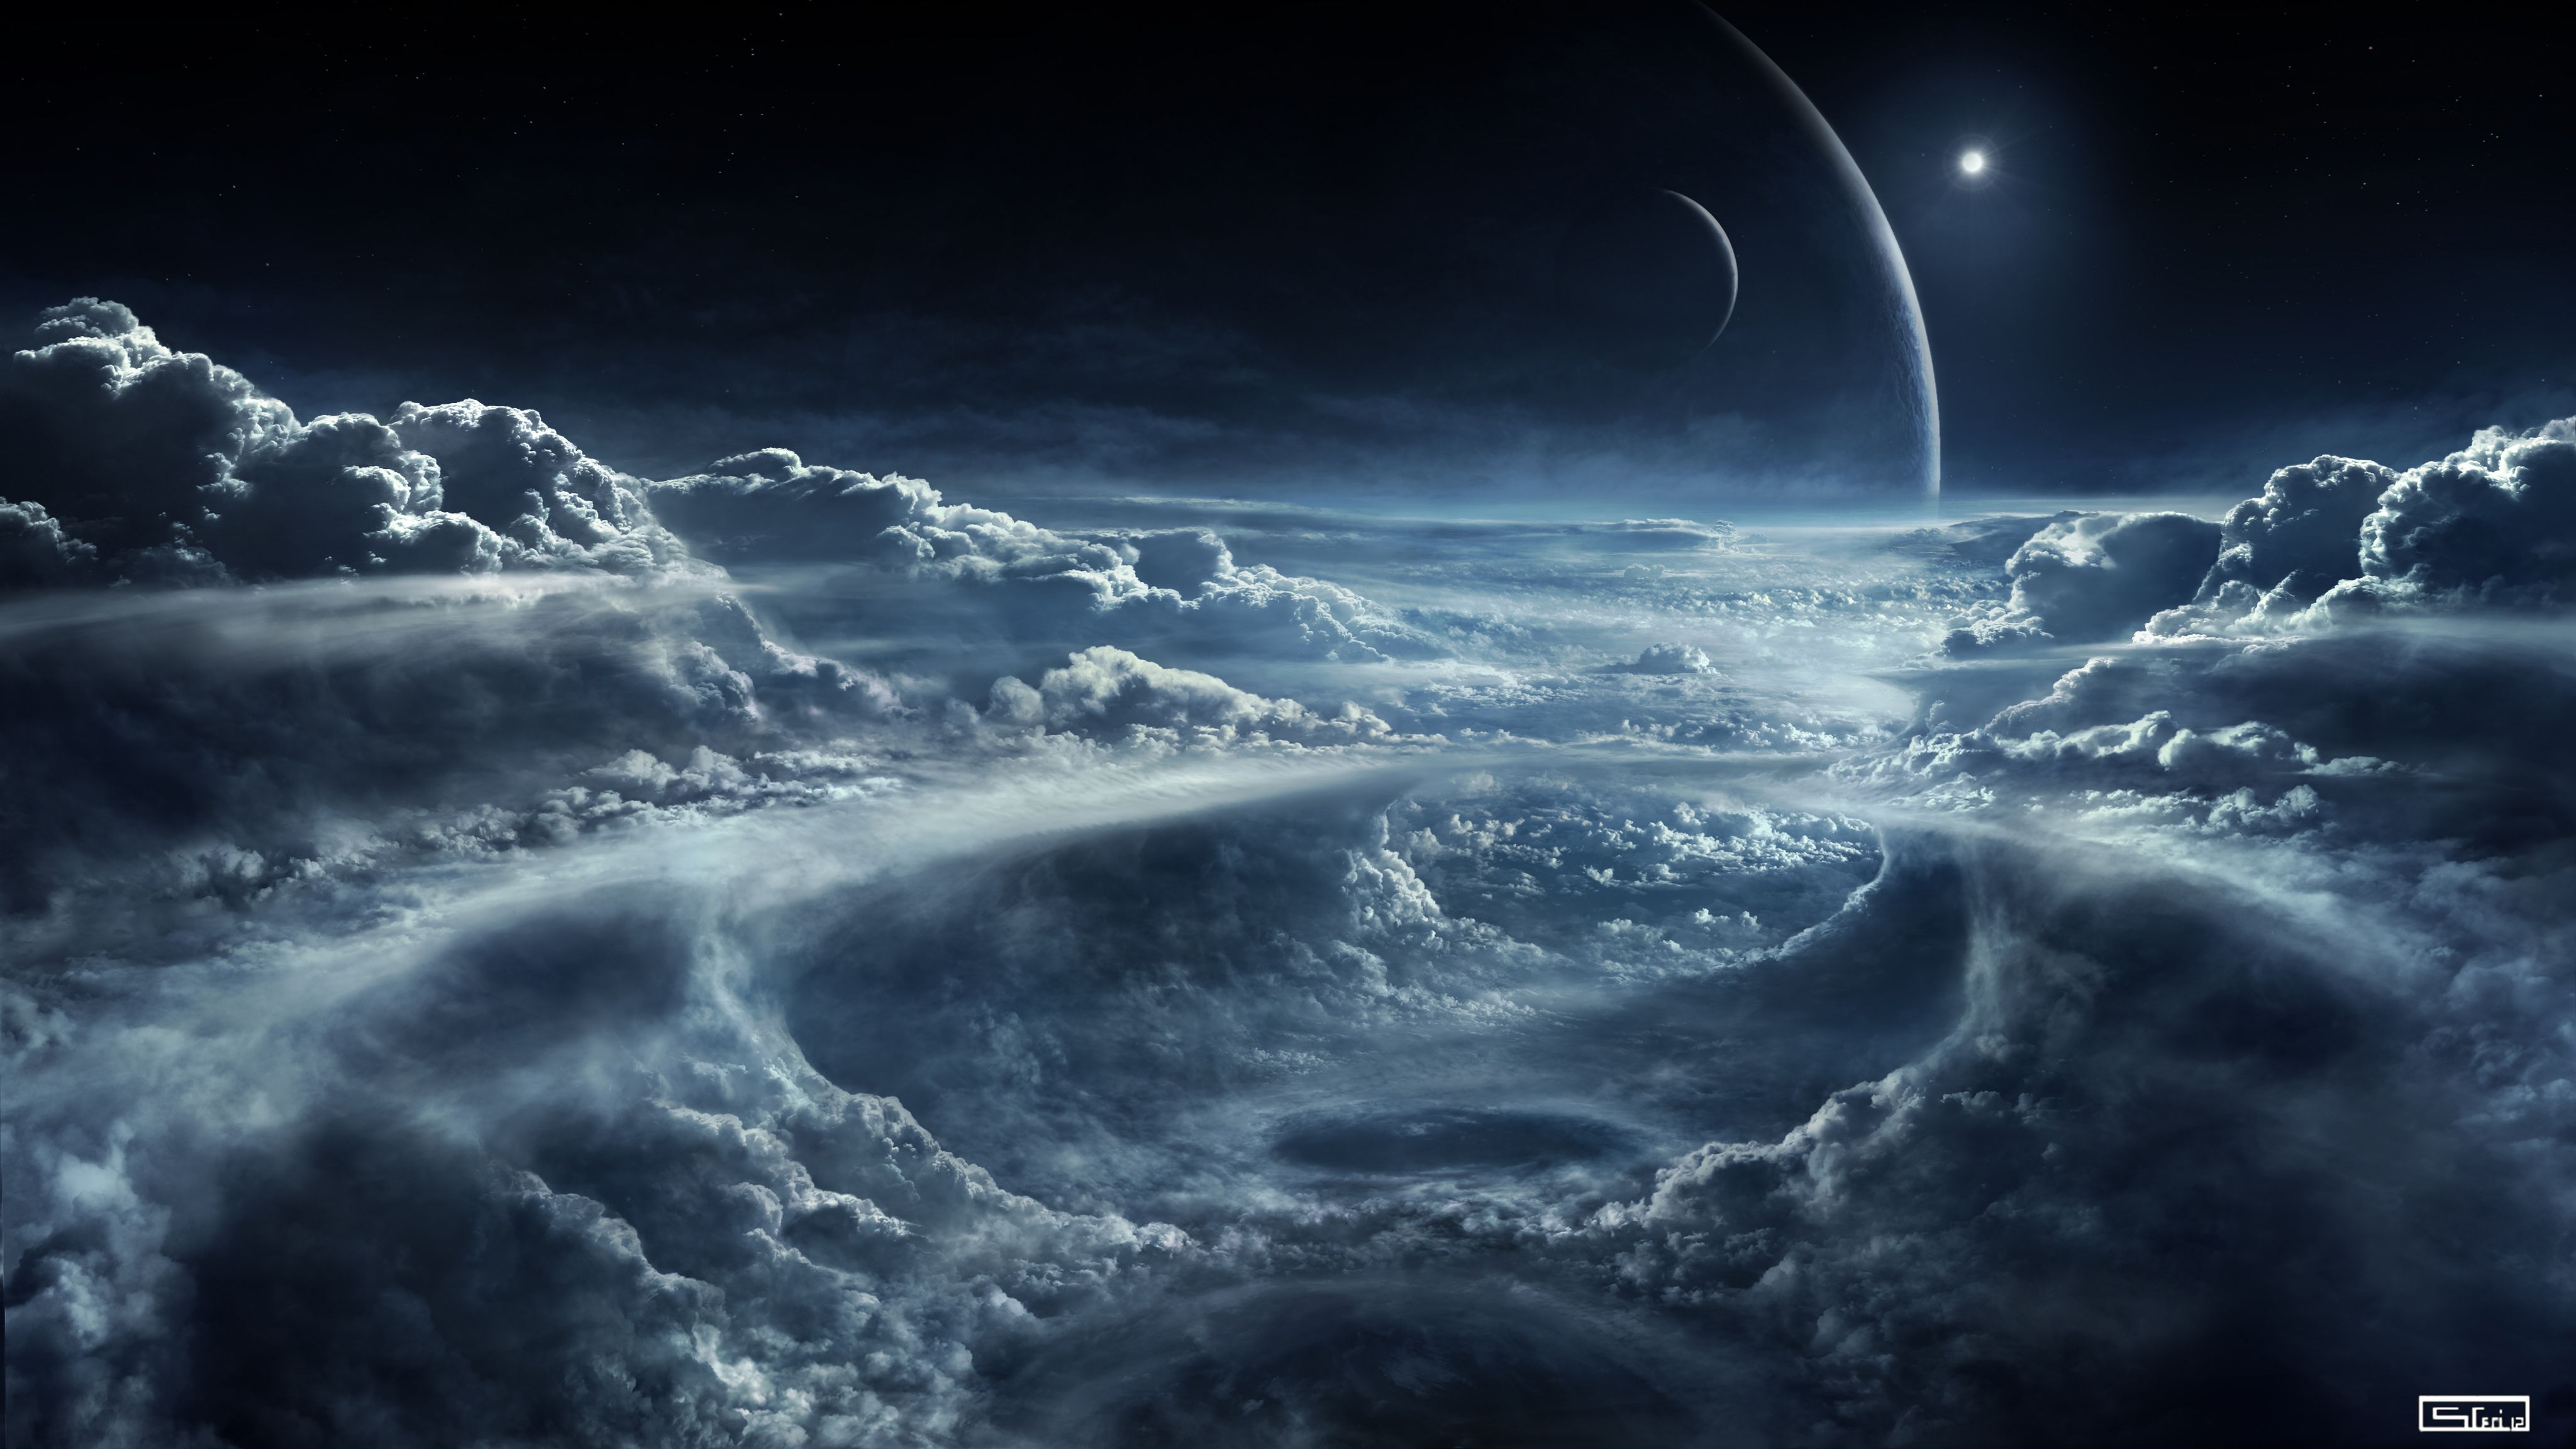 4K Space and Clouds Wallpaper 4K Wallpaper - Ultra HD 4K Backgrounds